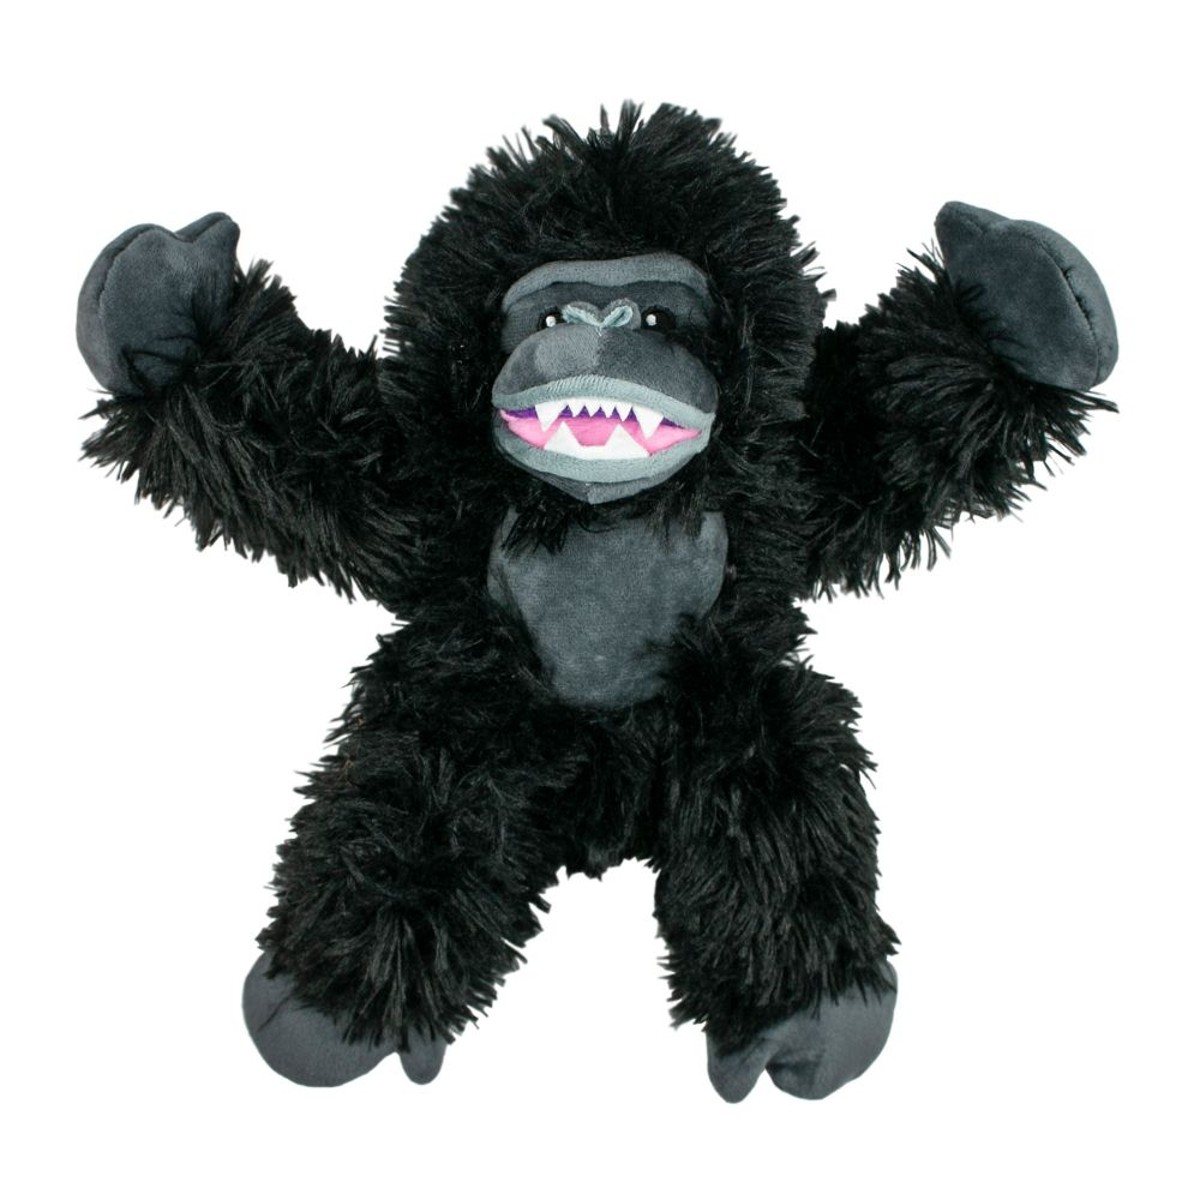 Tall Tails Plush Inner Rope Dog Toy - Gorilla